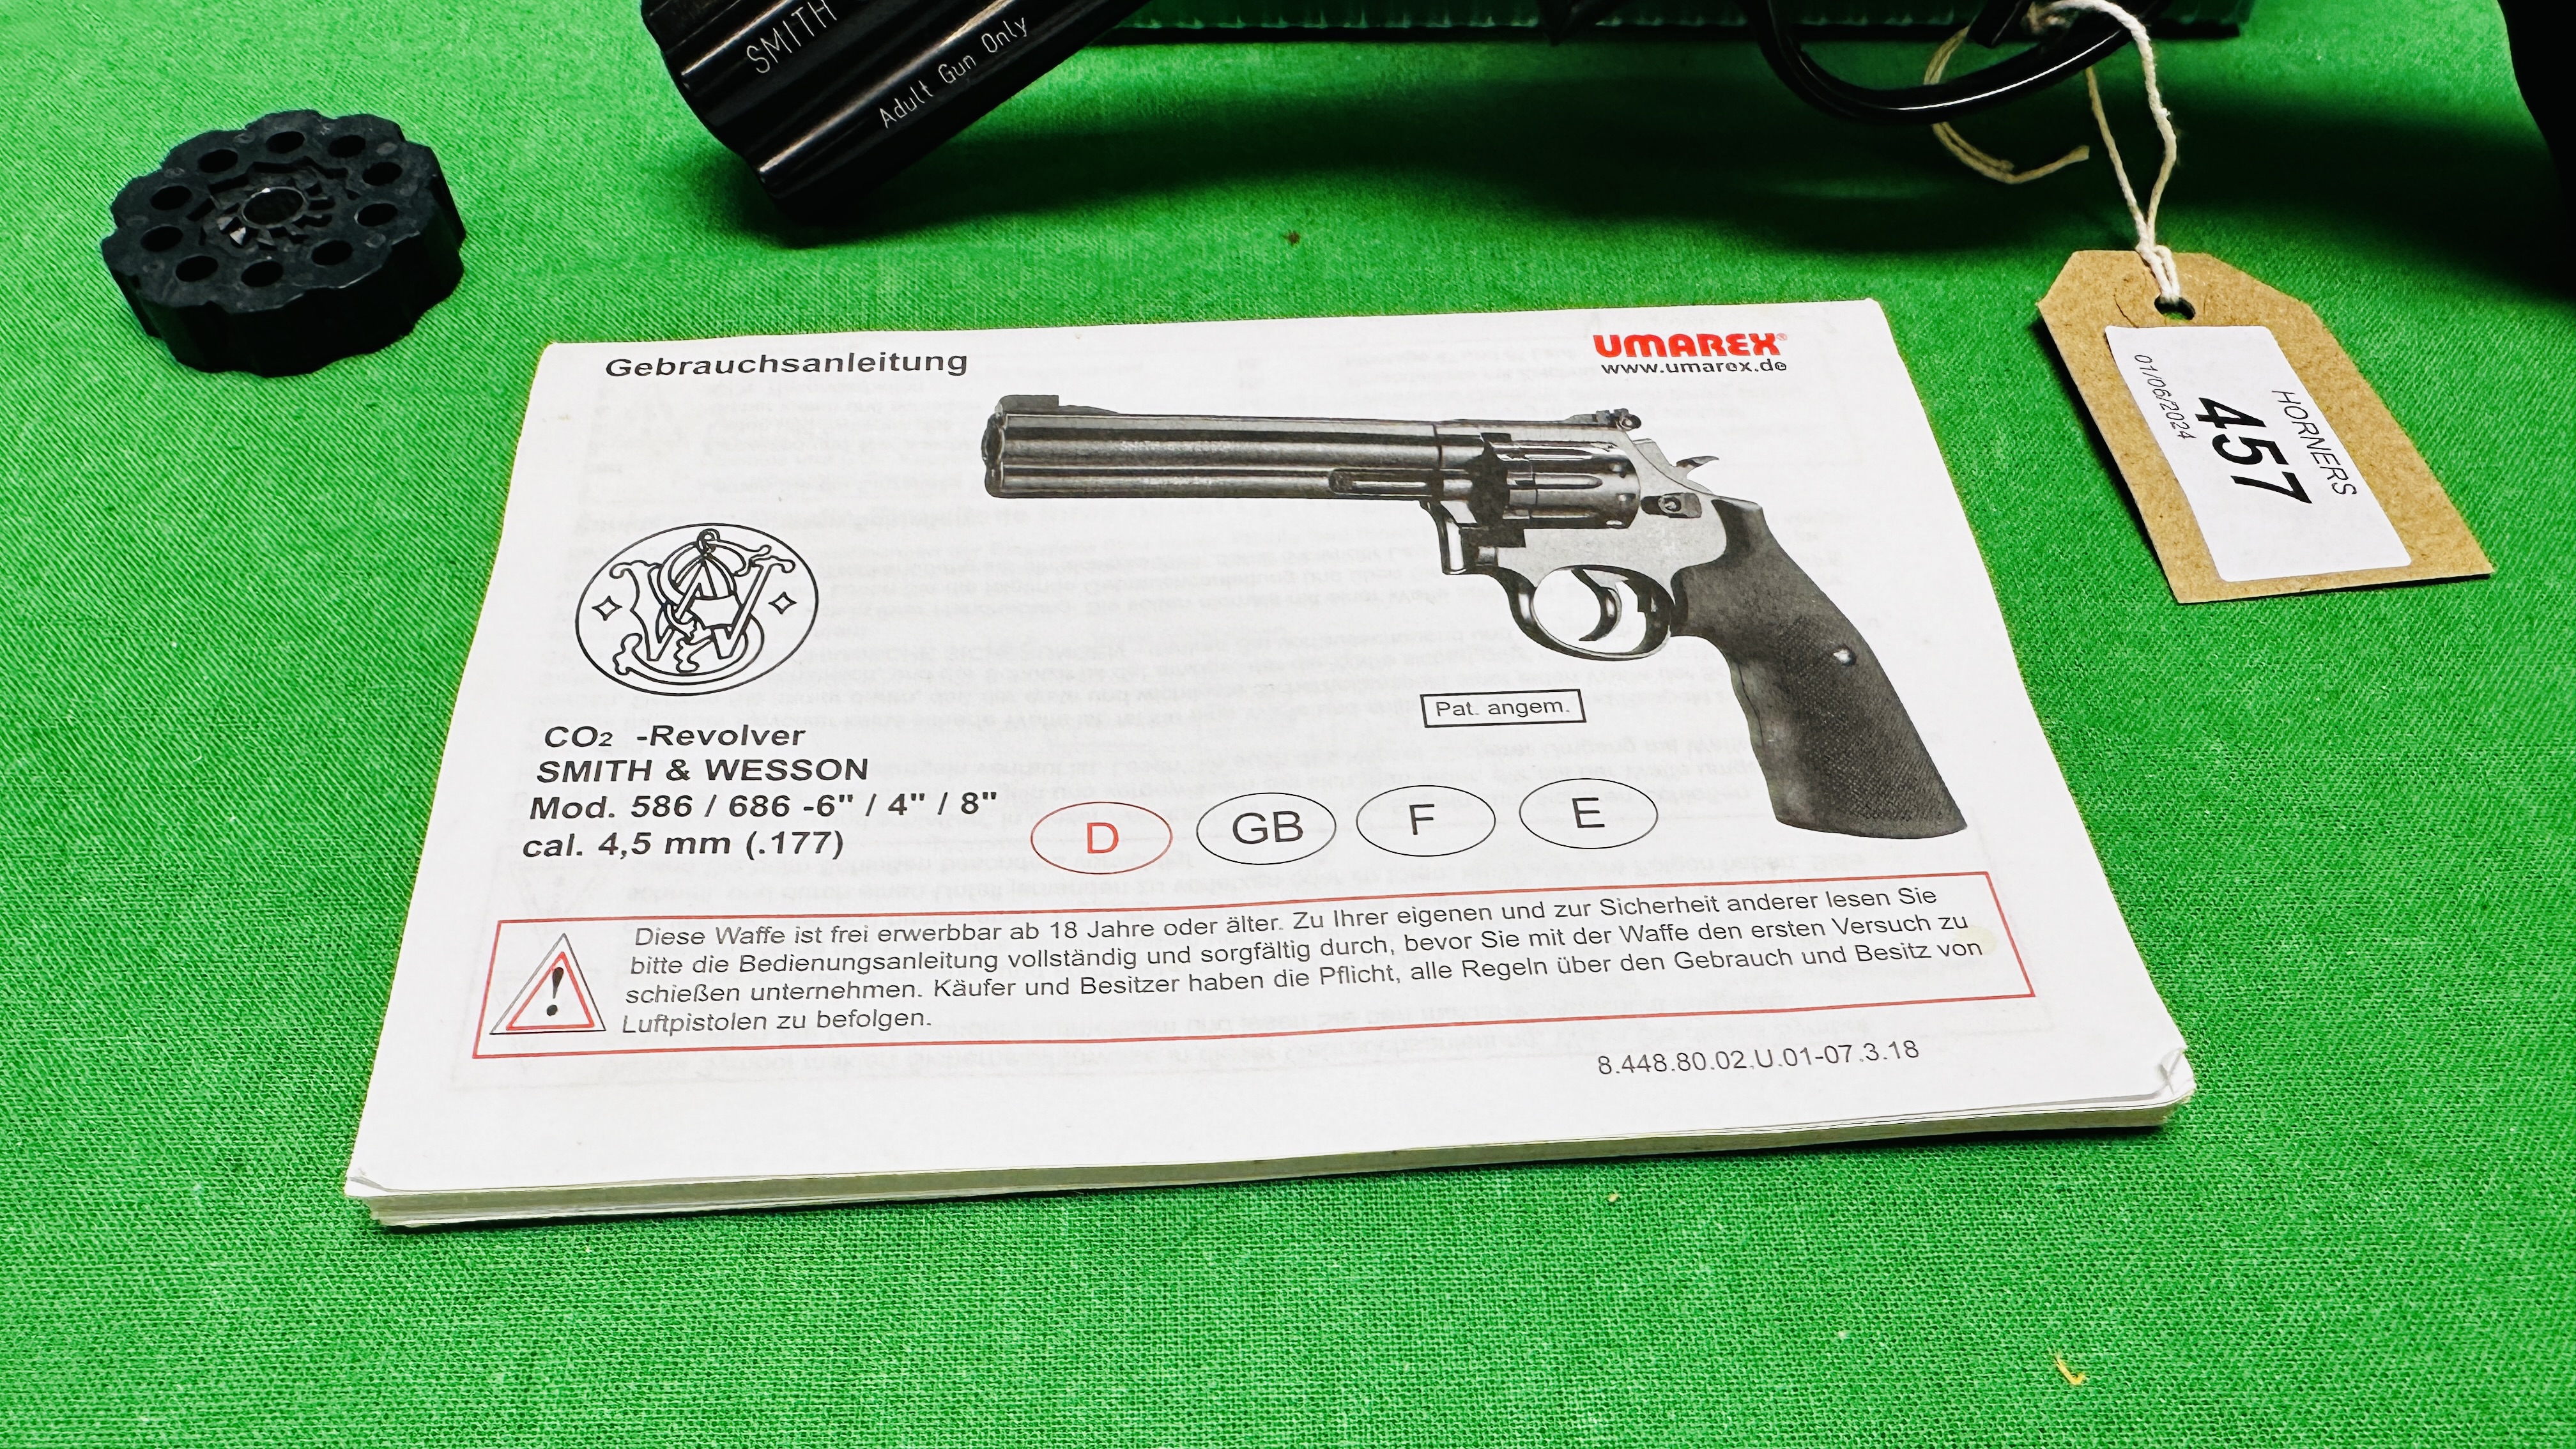 AN UMAREX SMITH & WESSON CO2 . - Image 5 of 12